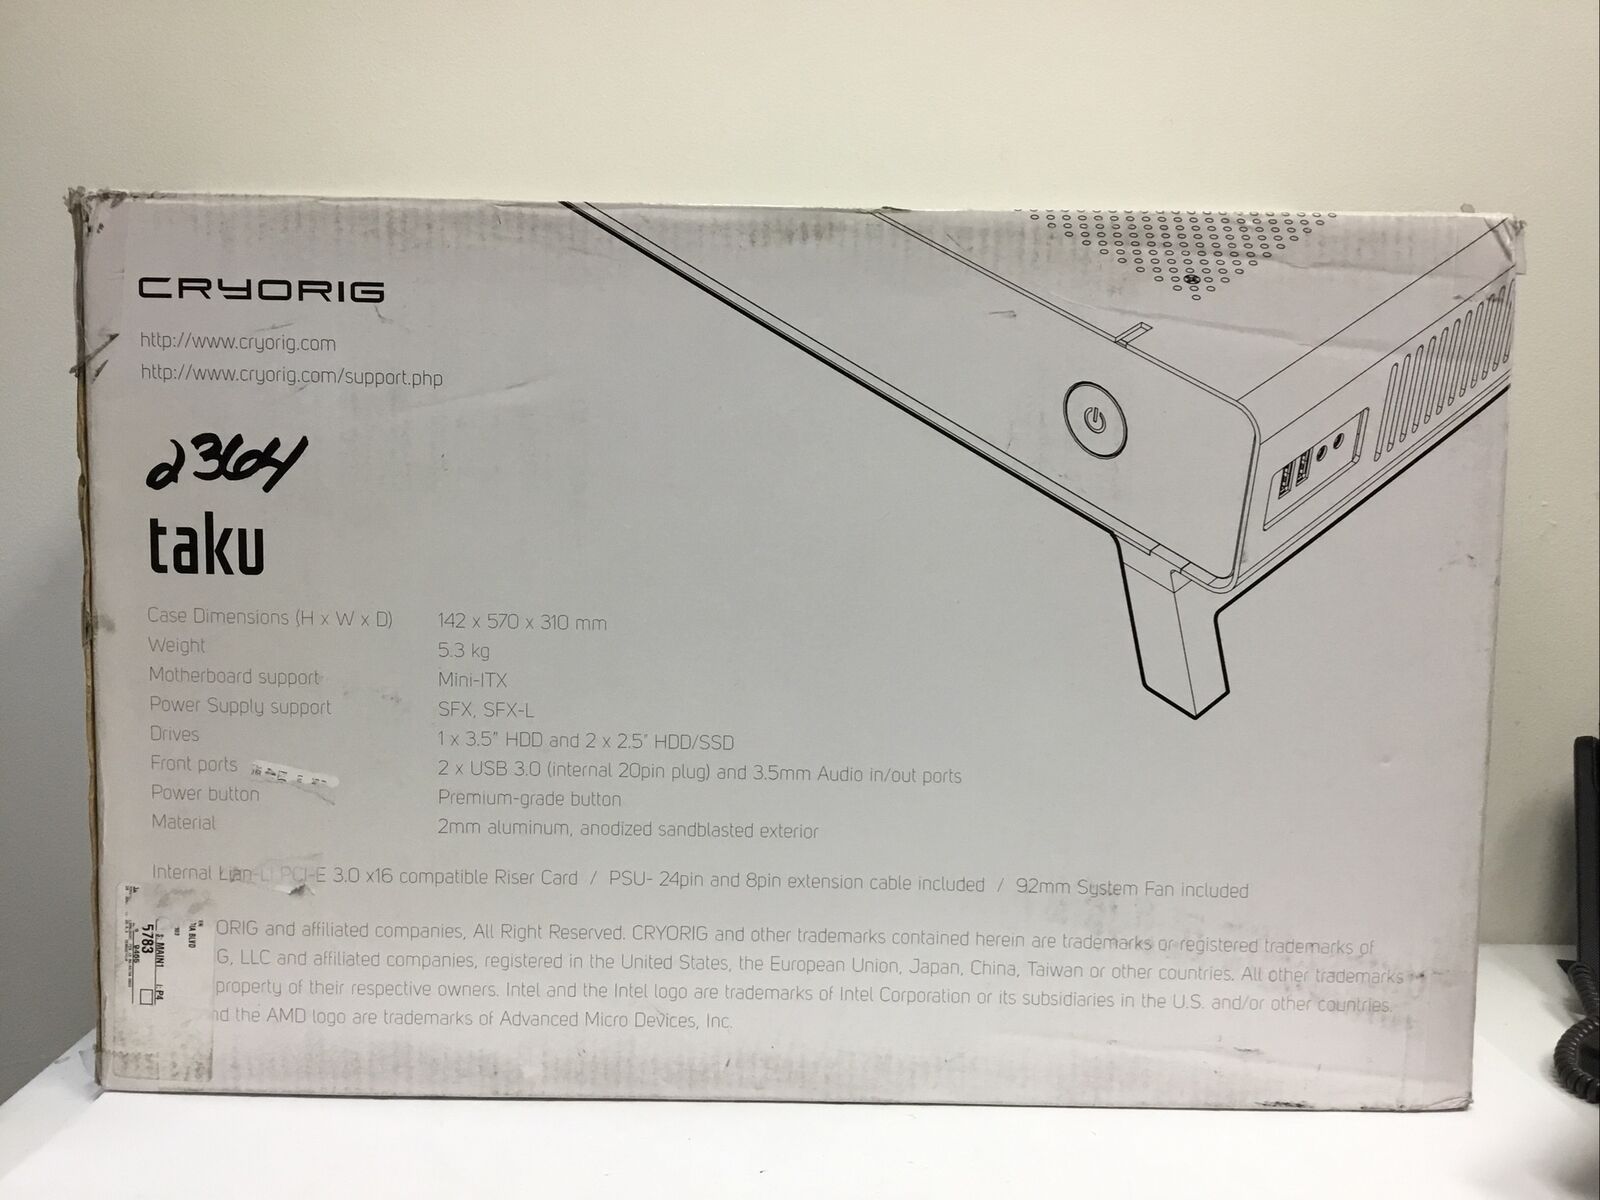 Cryorig Taku Case - The PC Monitor Stand - EXTREMELY RARE